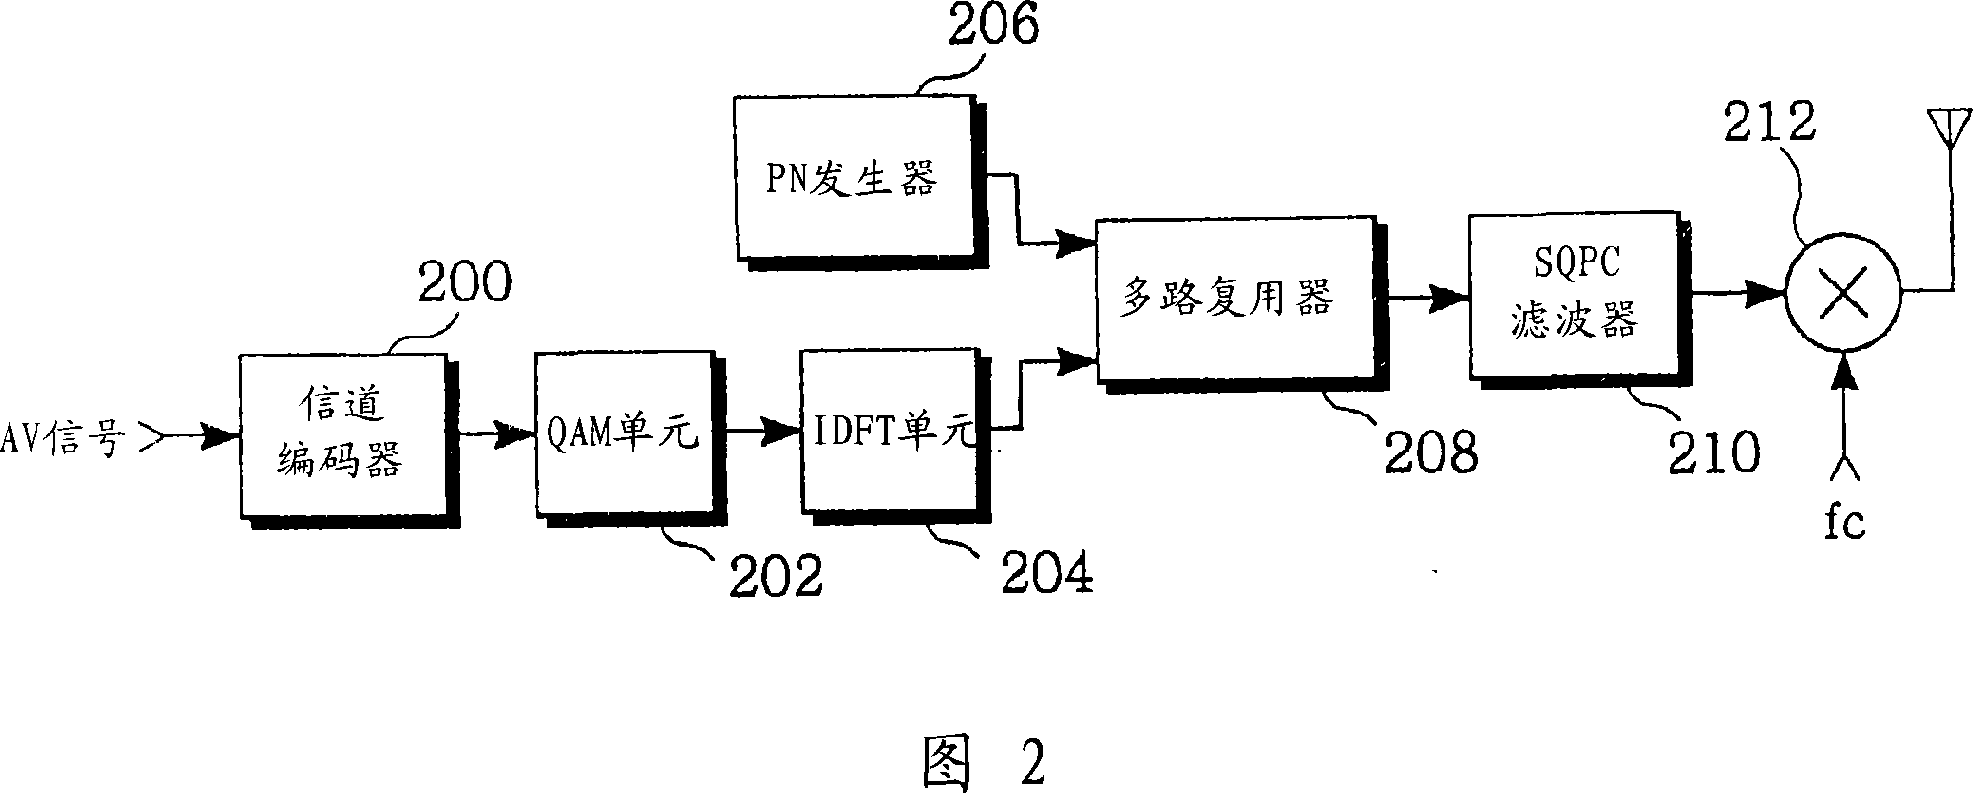 Method and apparatus for digital automatic gain control